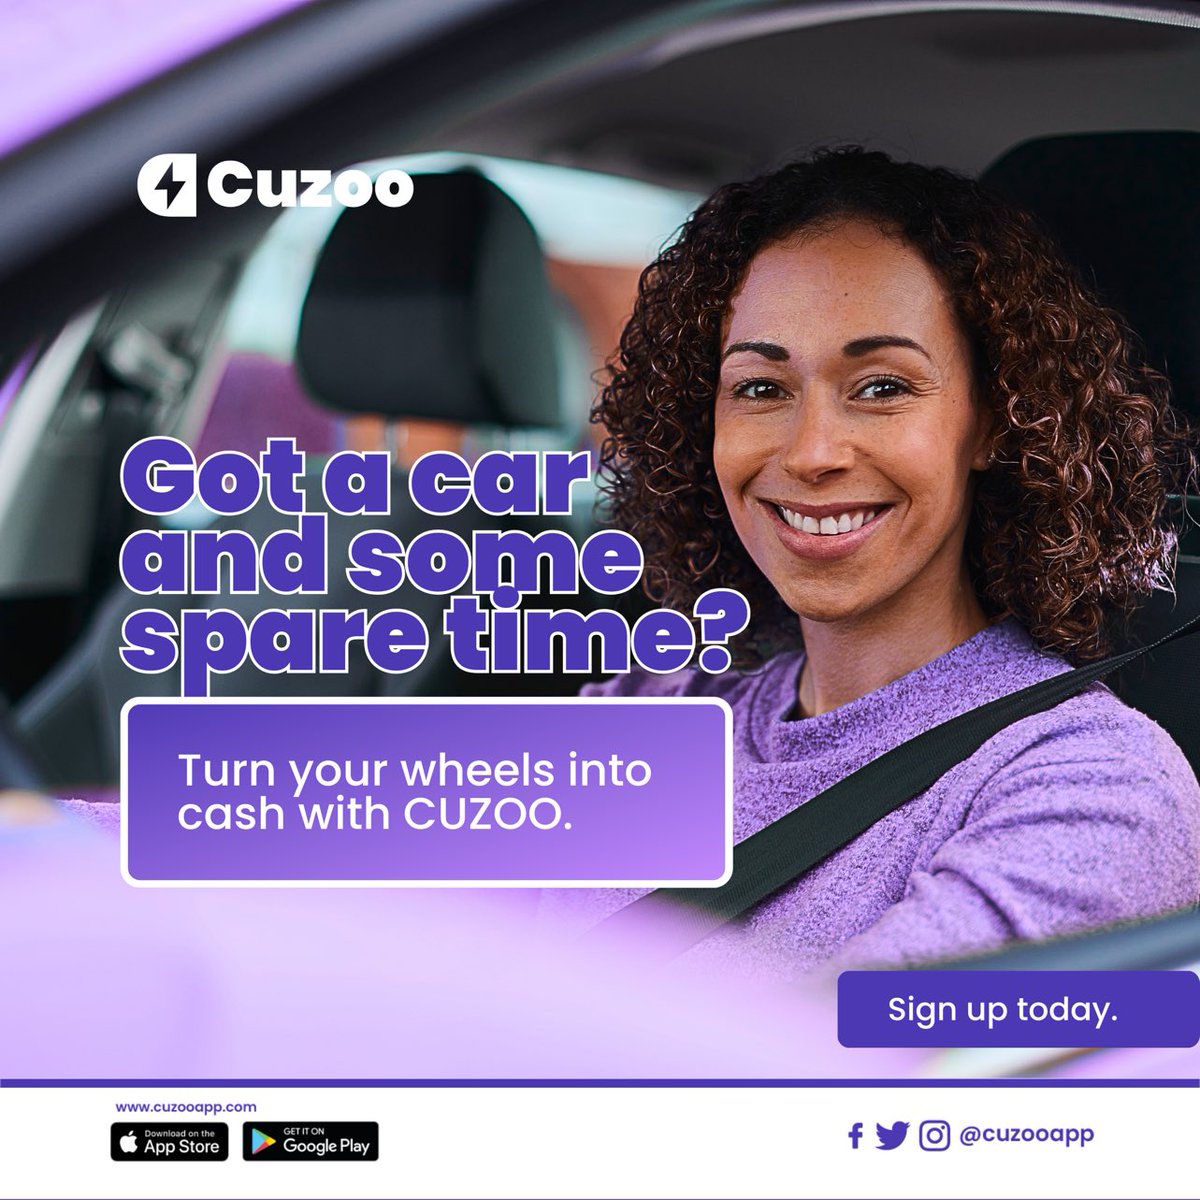 Got a car and some spare time? Your wheels can be more than just transportation, turn them into cash with Cuzoo! Sign up today, and let your car become a source of income with Cuzoo!
  #DriveWithCuzoo #SpareTimeIncome #CuzooOpportunity #DriveAndEarn